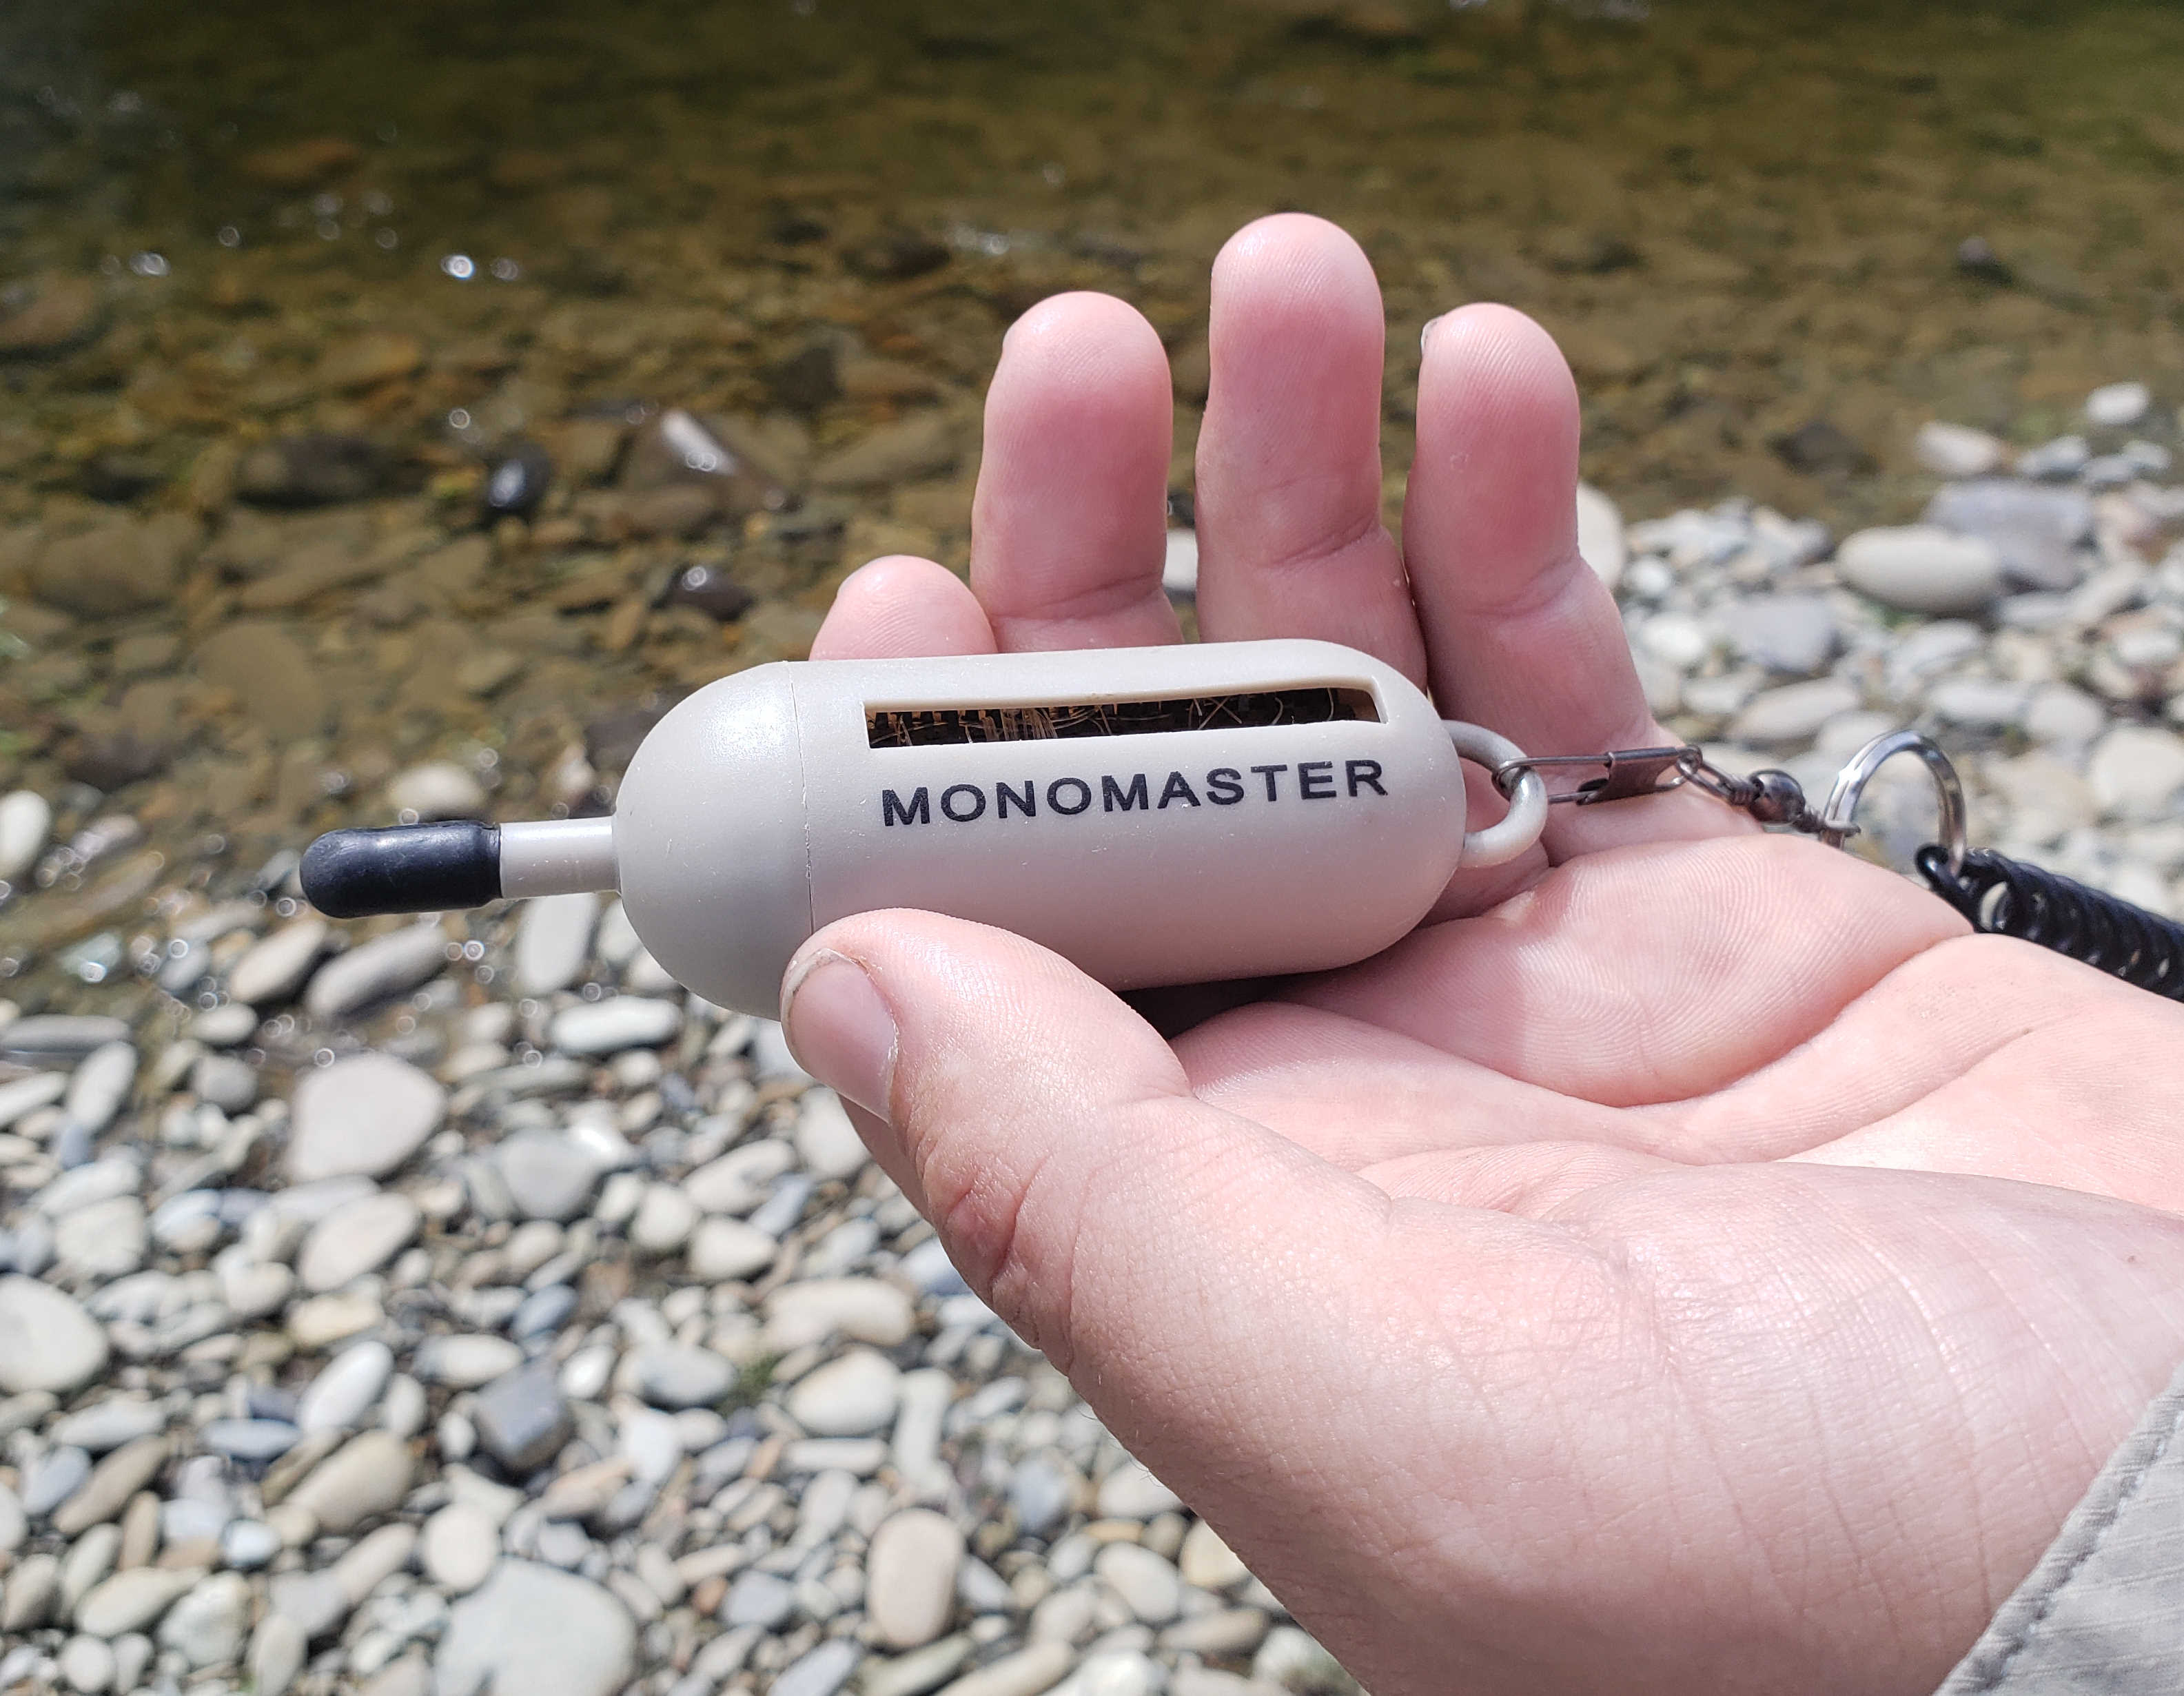 WFR1920.19 tools like the monomaster make storing and disposing of fishing line easier